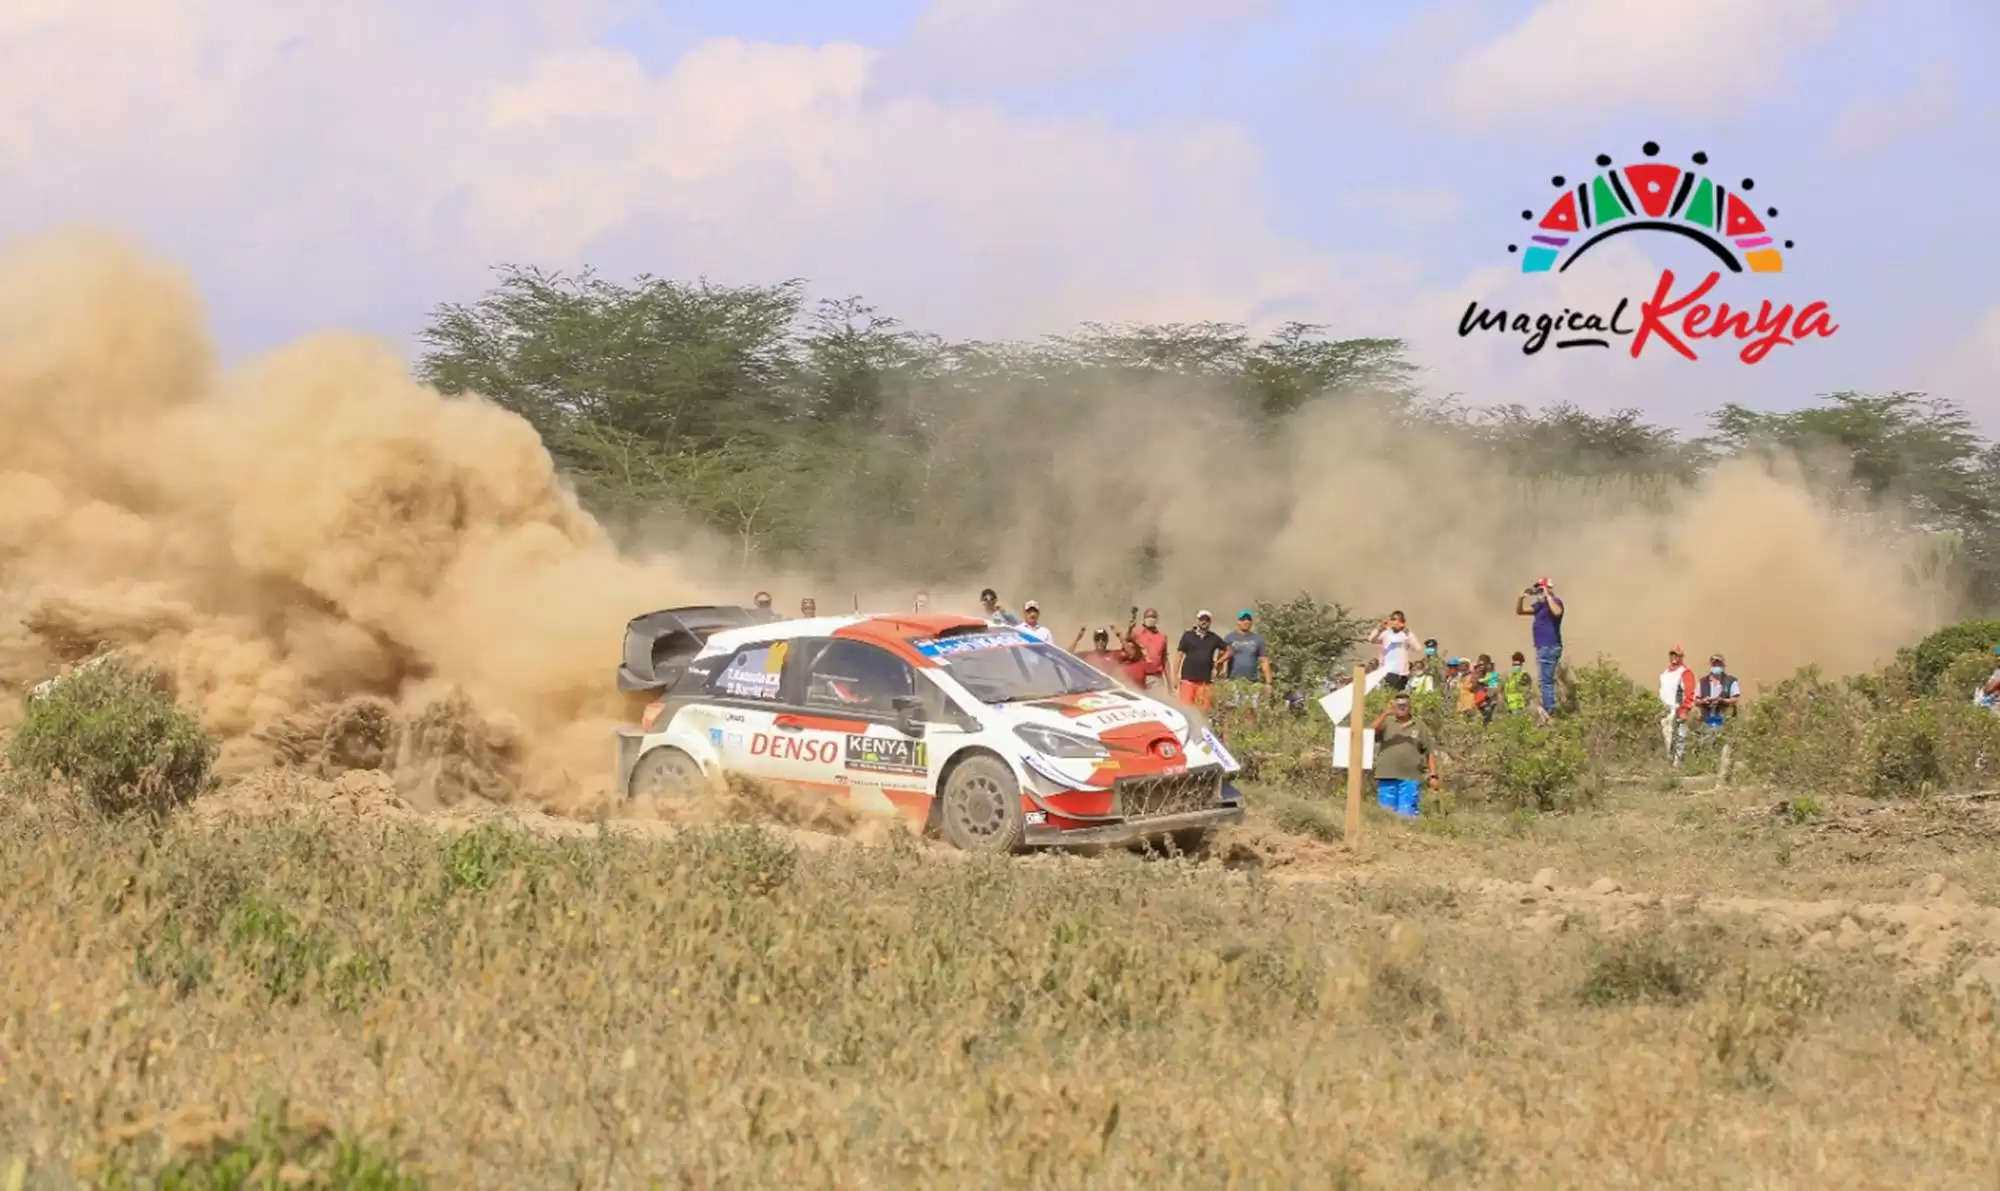 Kenya will be hosting the World Rally Championship (WRC) for the next five years -every year until 2026, after the government of Kenya secured the hosting rights from the International Automobile Federation (FIA) and the WRC